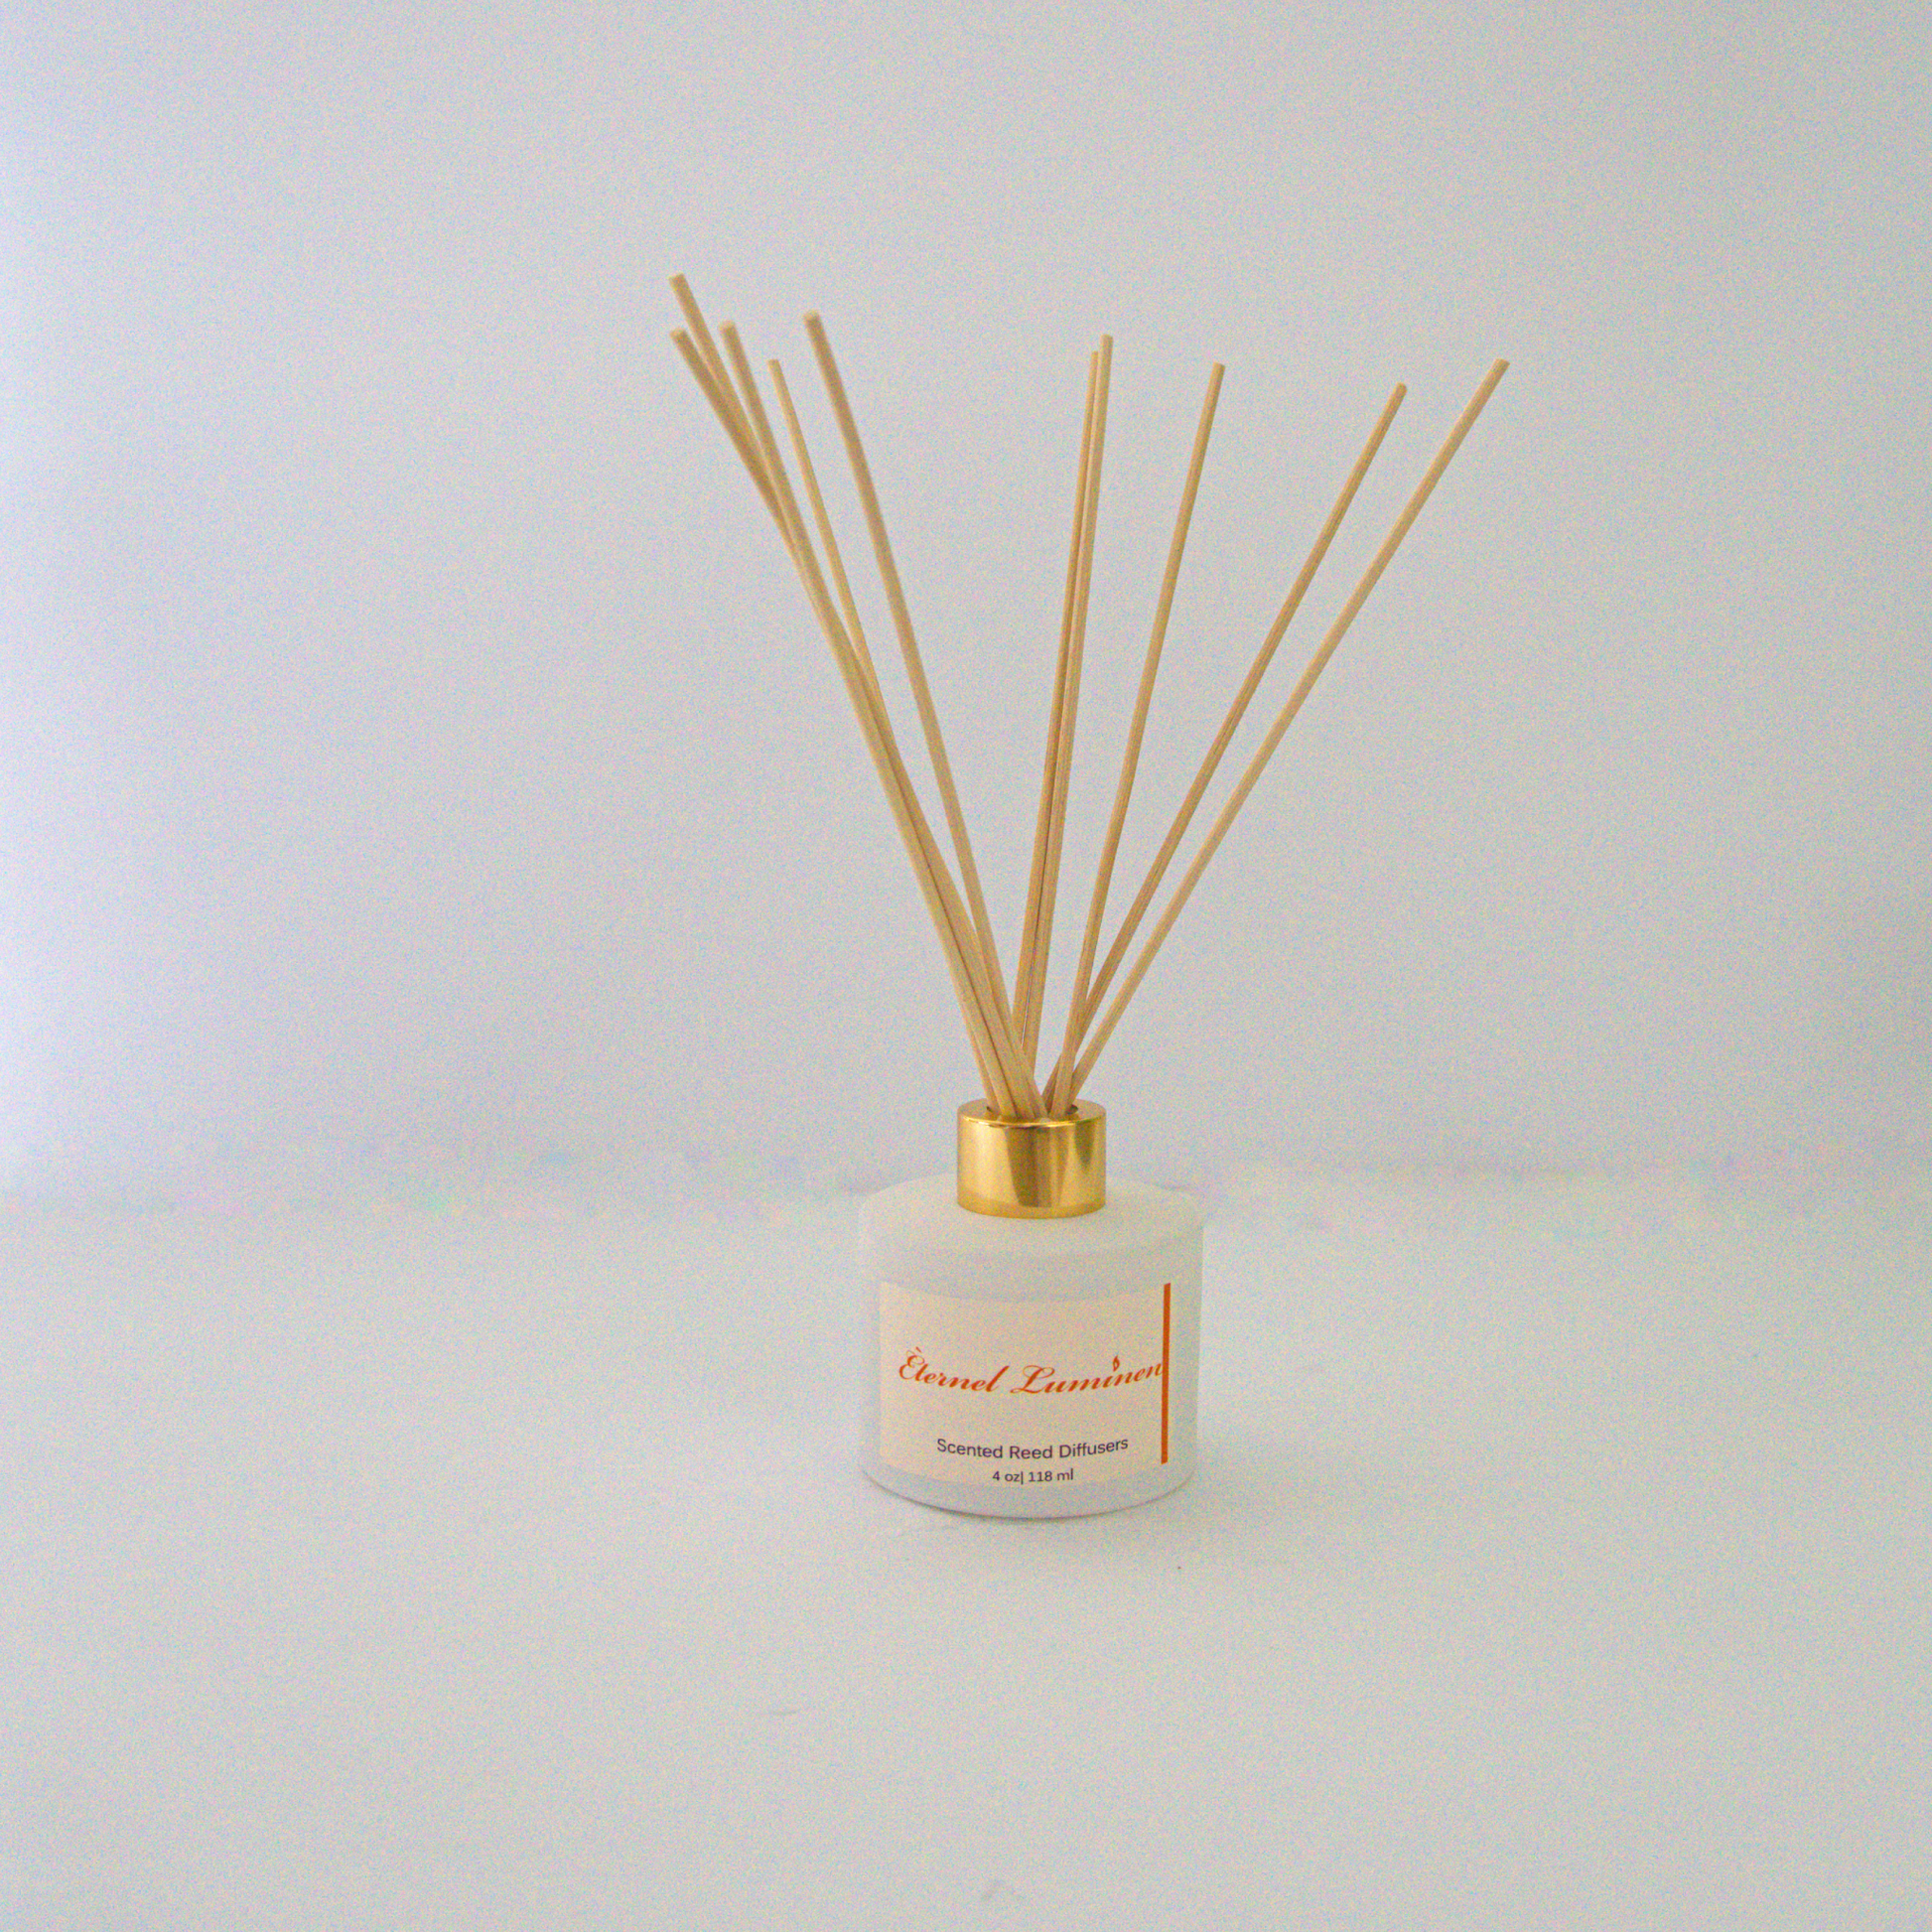 A 2.75 oz white jar with a gold band reed diffuser sitting against a white background made by Eternel Luminen.